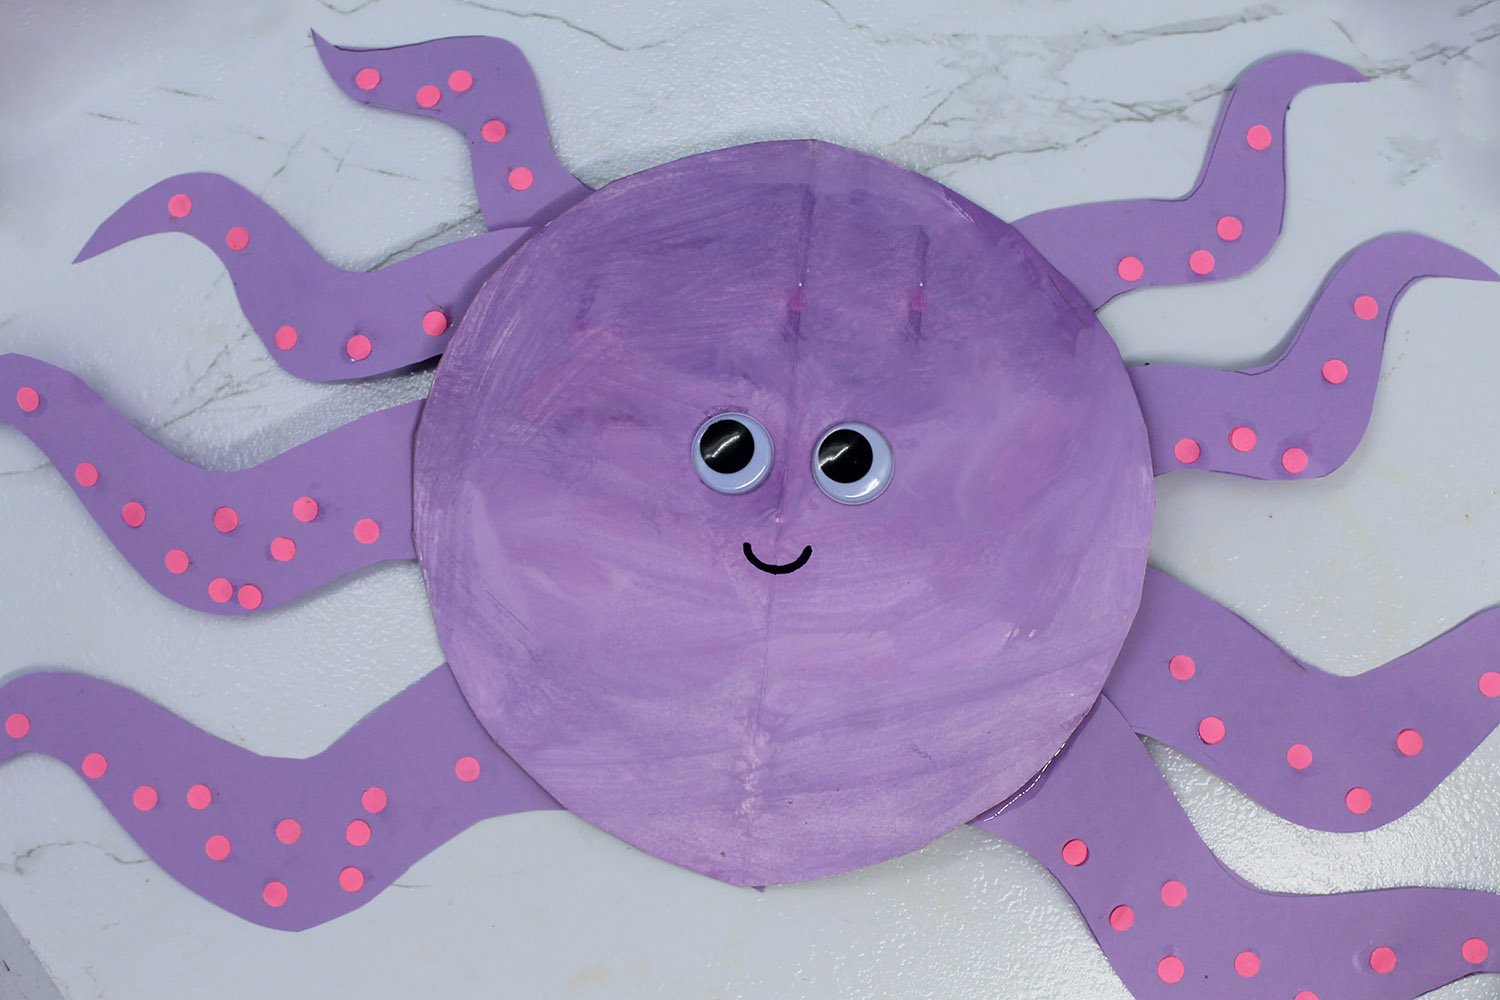 How to Make a Paper Plate Octopus - Finish